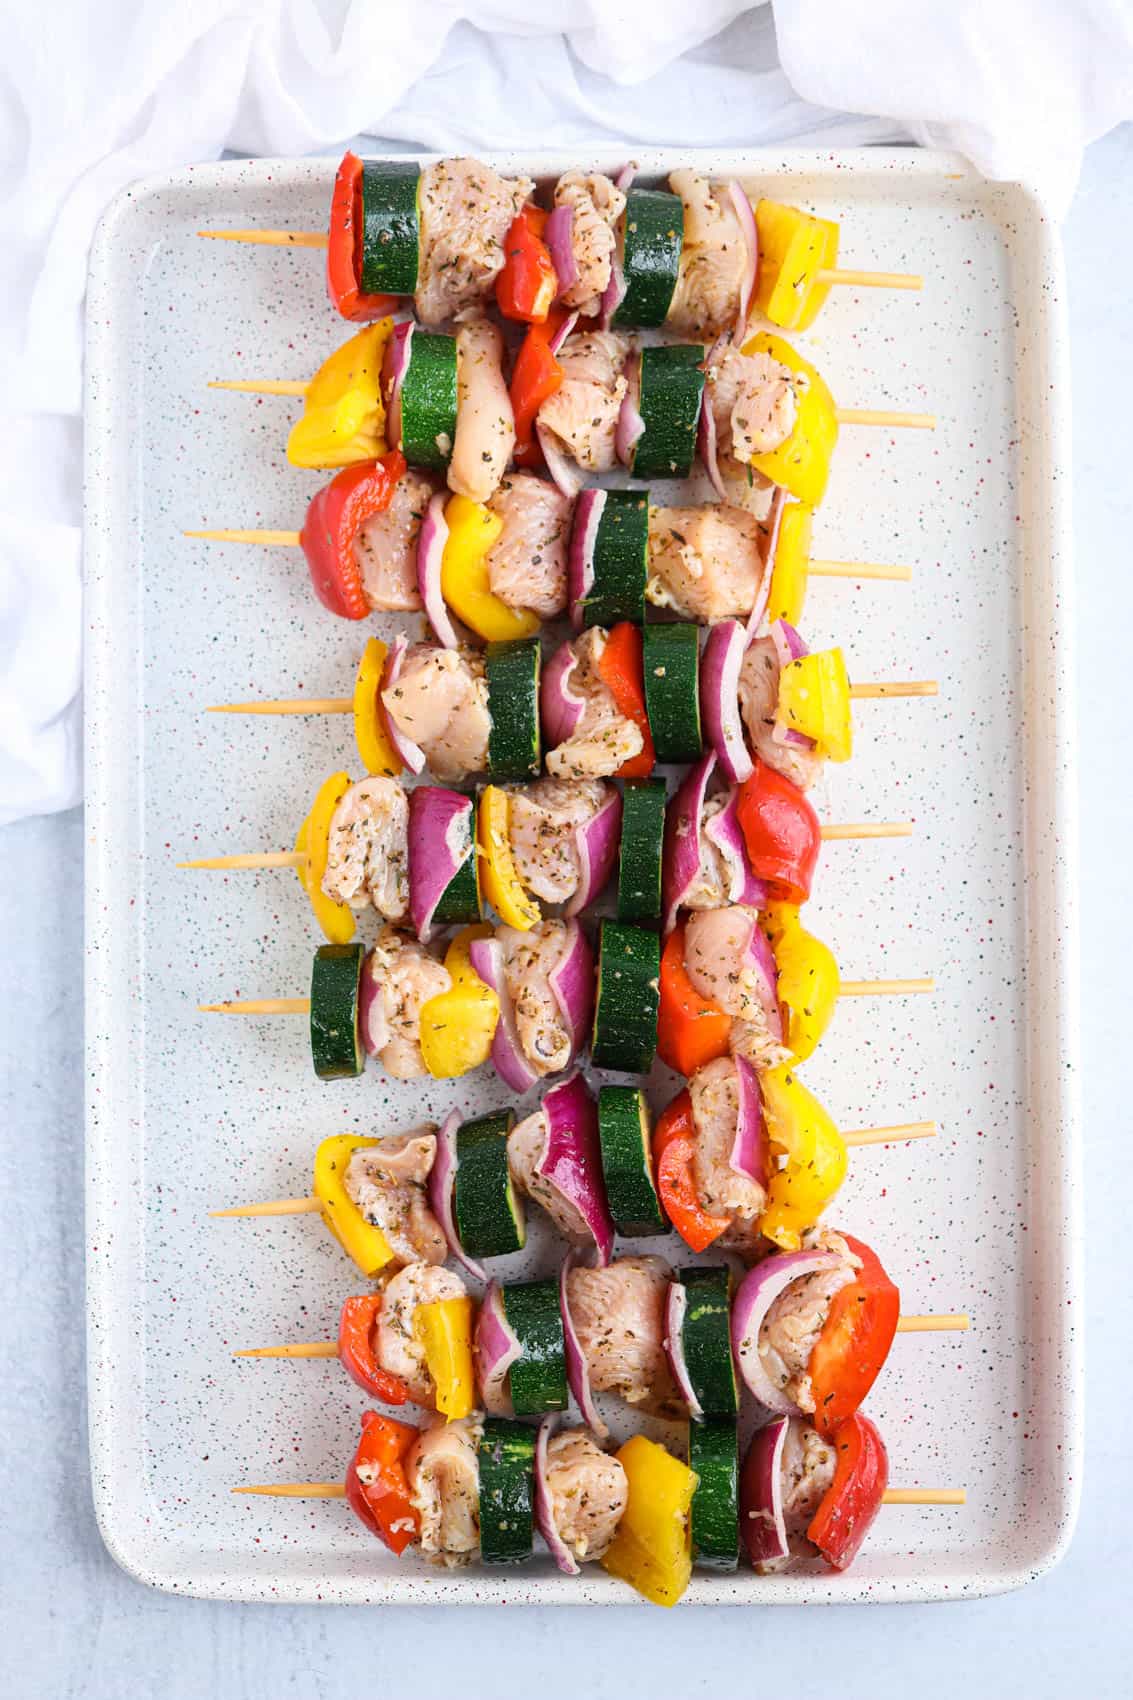 raw chicken and vegetable kebabs on wooden skewers on a baking sheet.